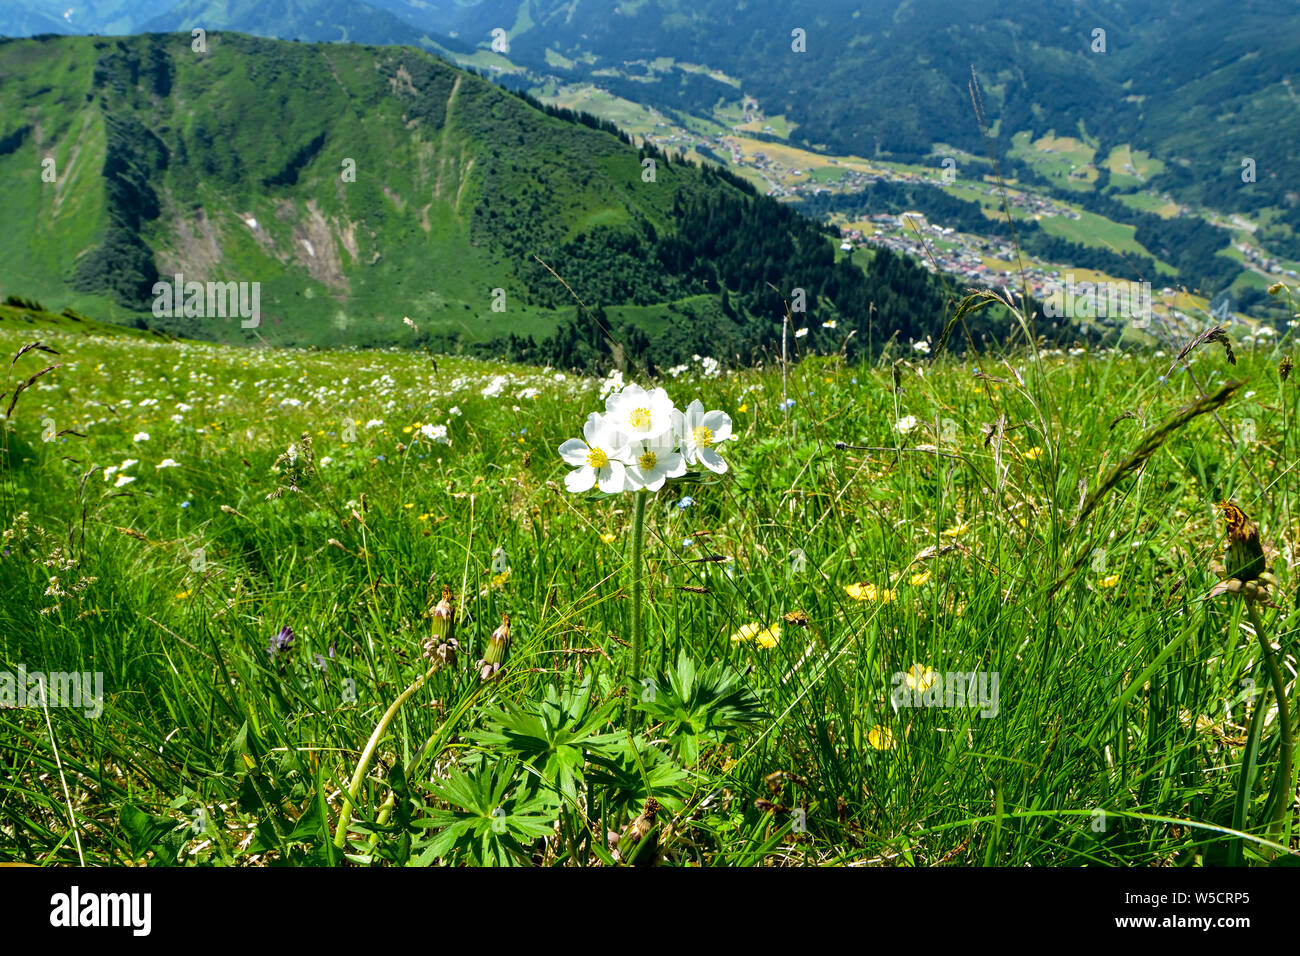 Beauty mountain panorama landscape with wildflowers. Stock Photo